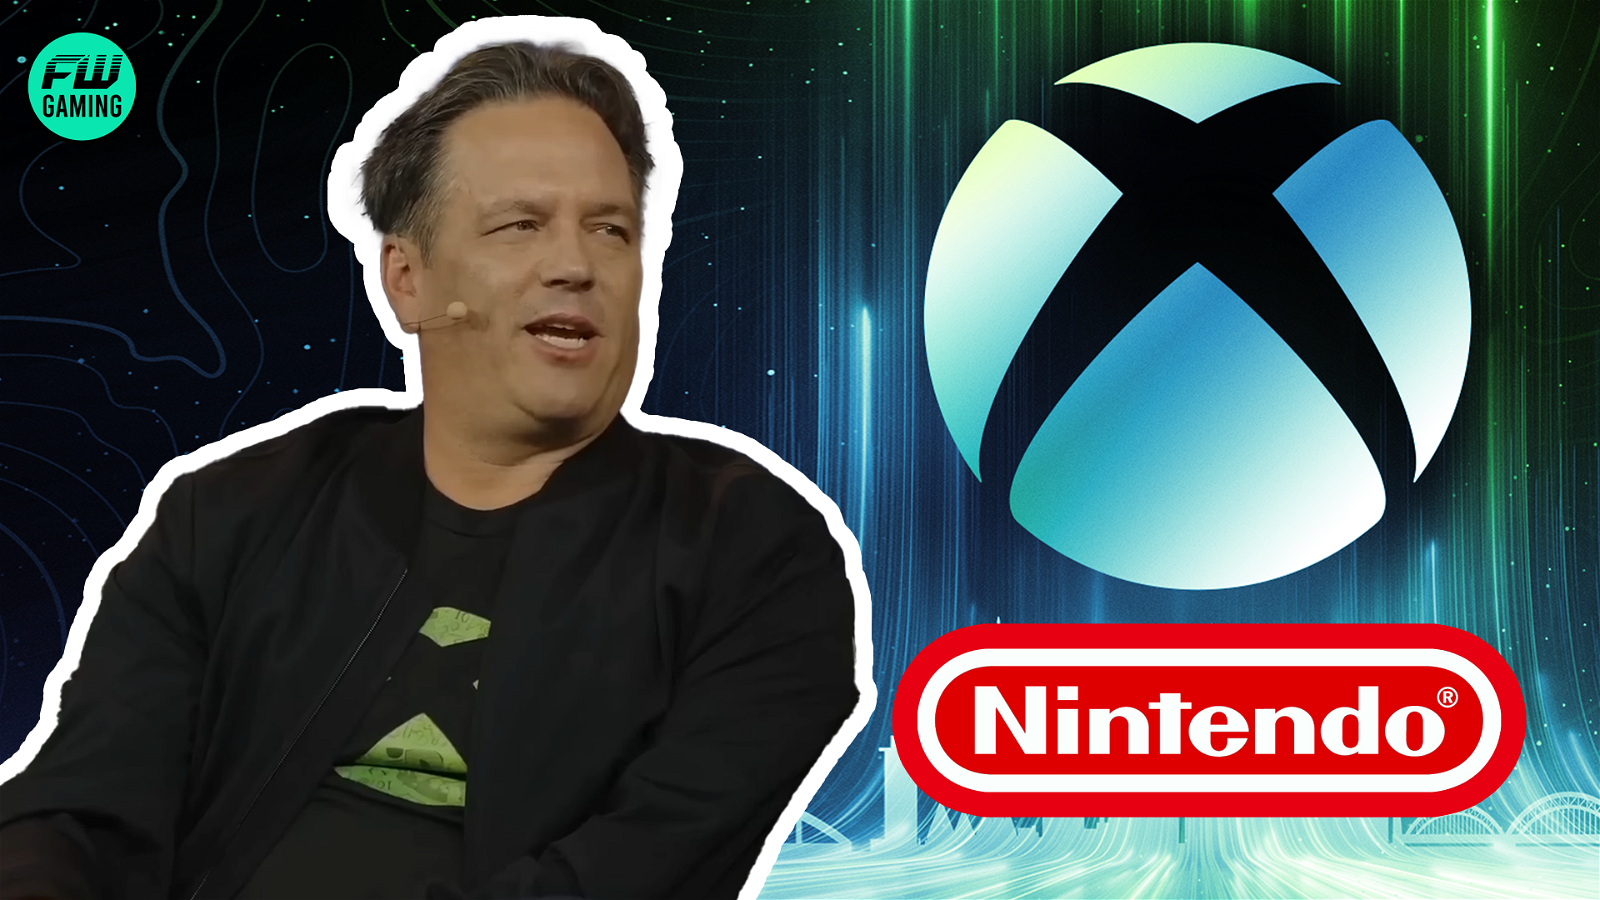 Leaked Emails Reveal That Xbox CEO Phil Spencer Wants to Buy Nintendo